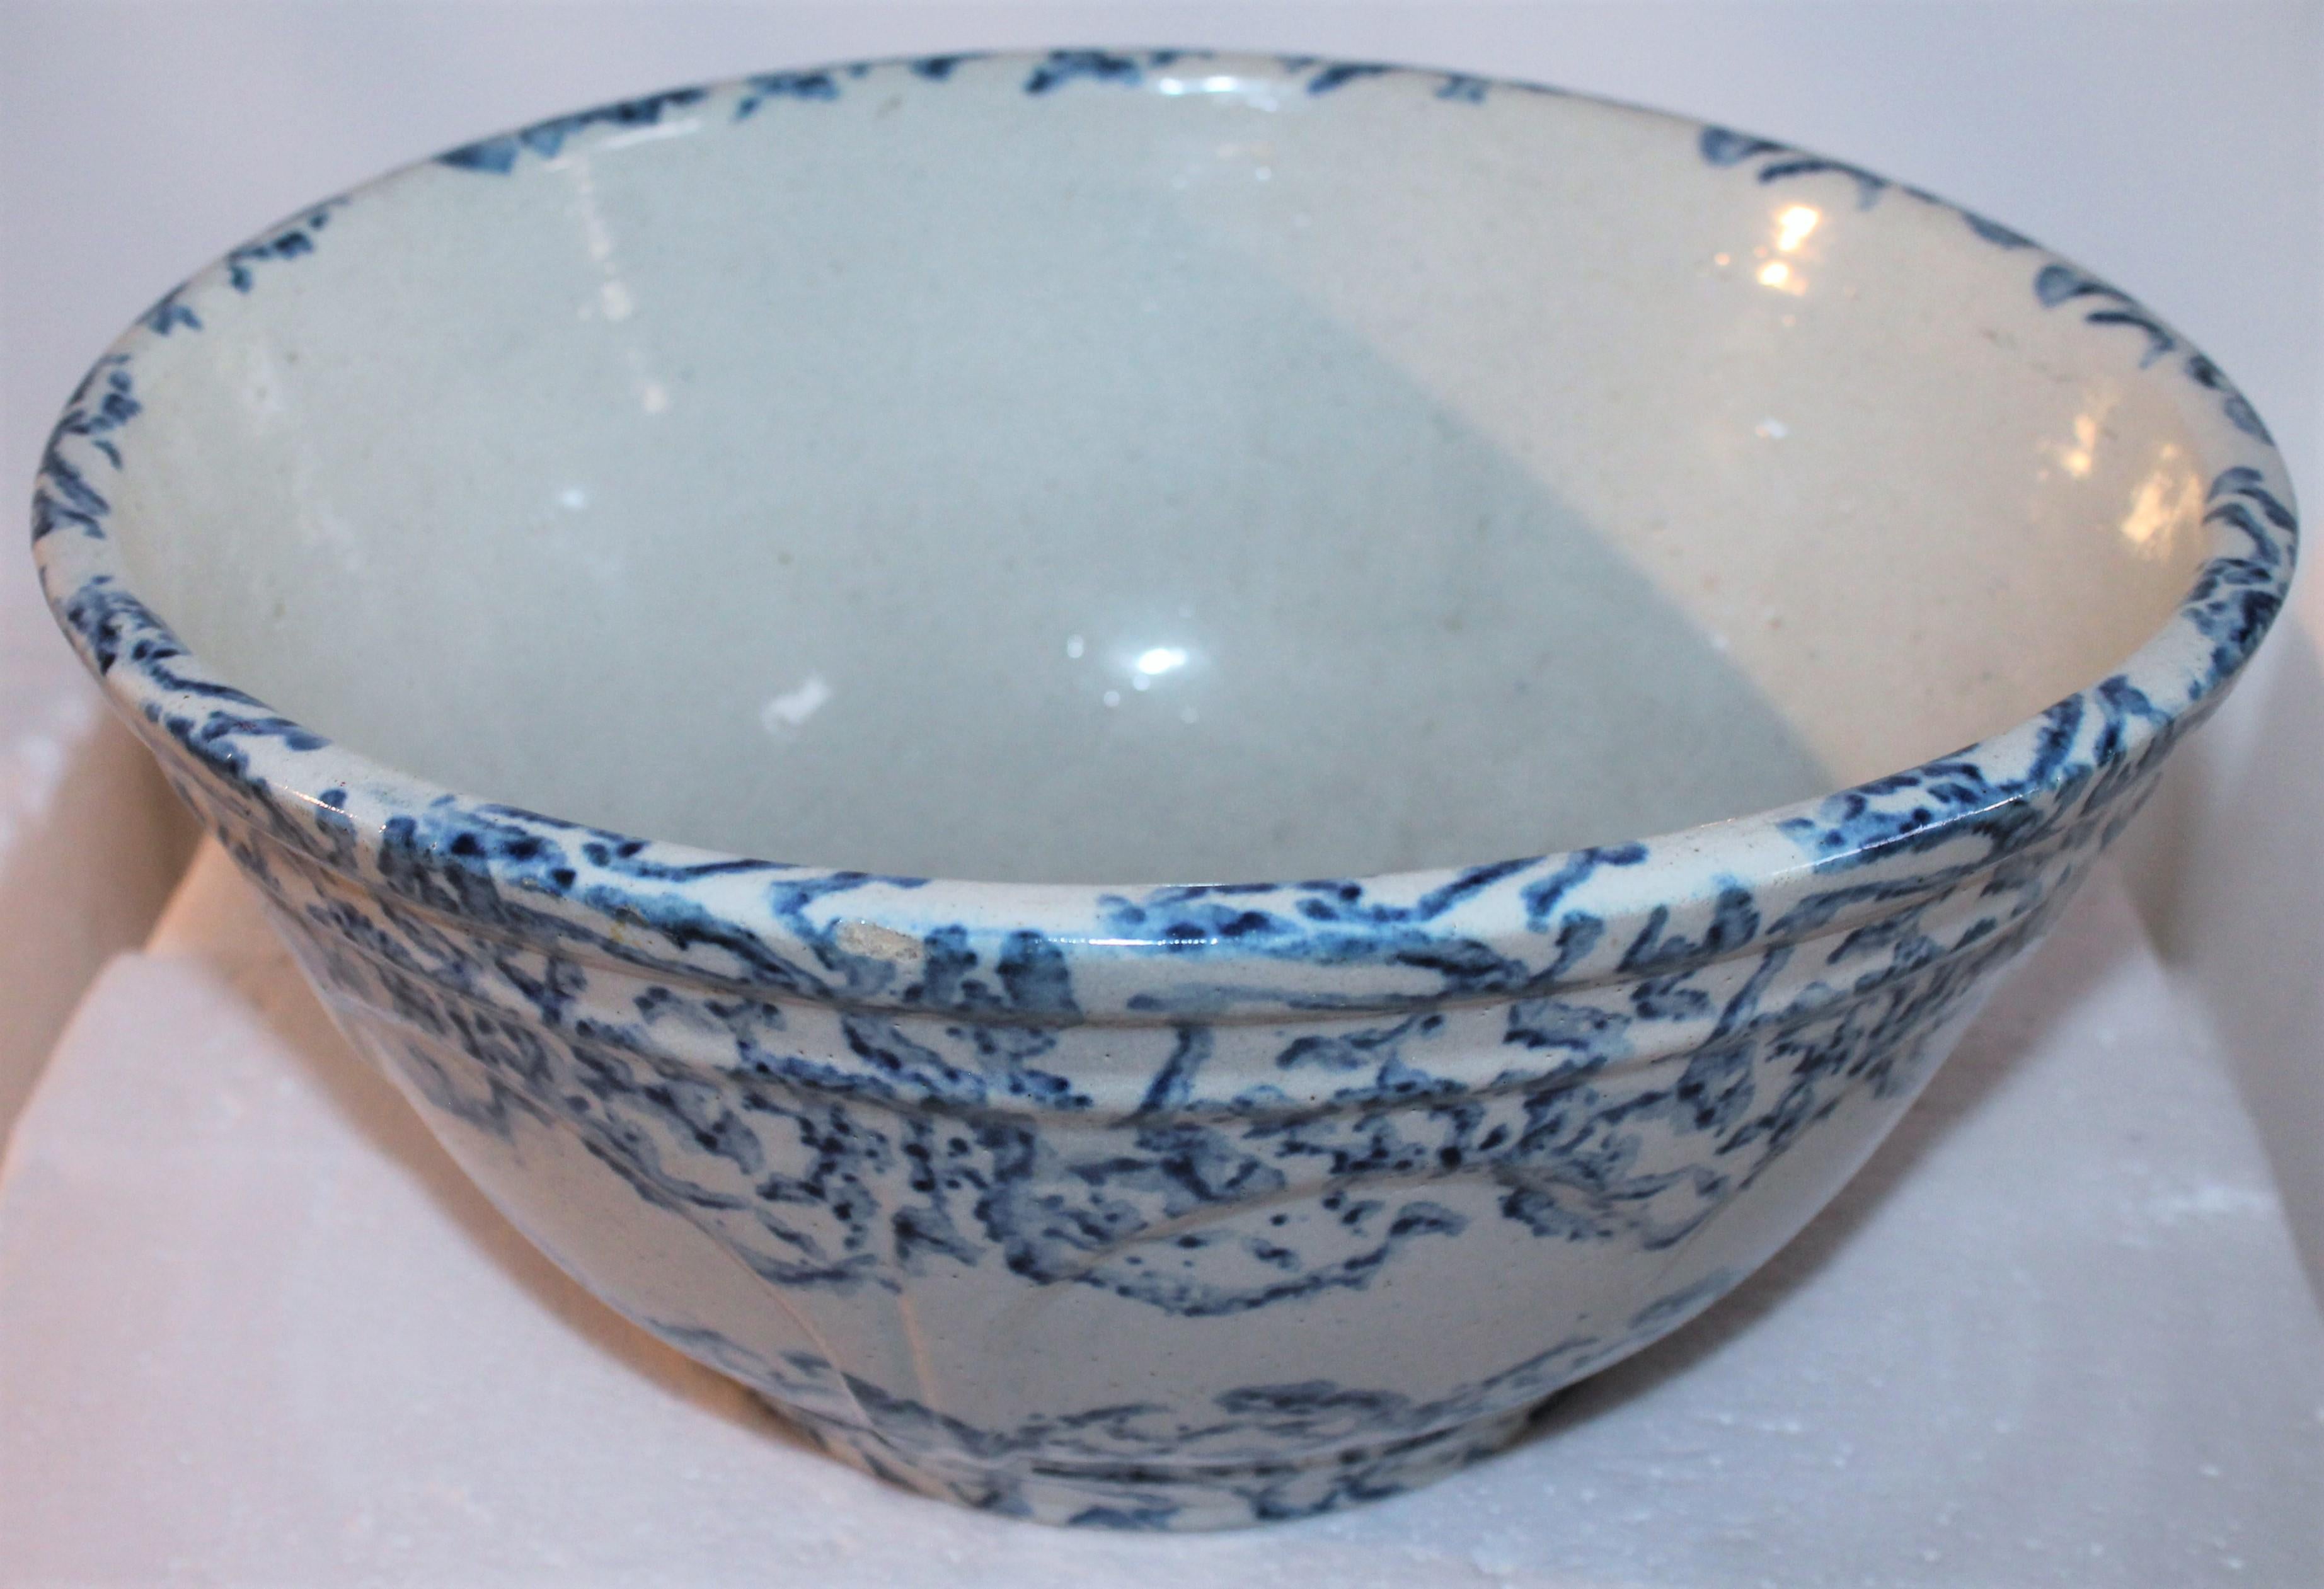 This 19th century sponge ware mixing bowl is in fine condition. The sponge bowl has a clam shell pattern design sponge.